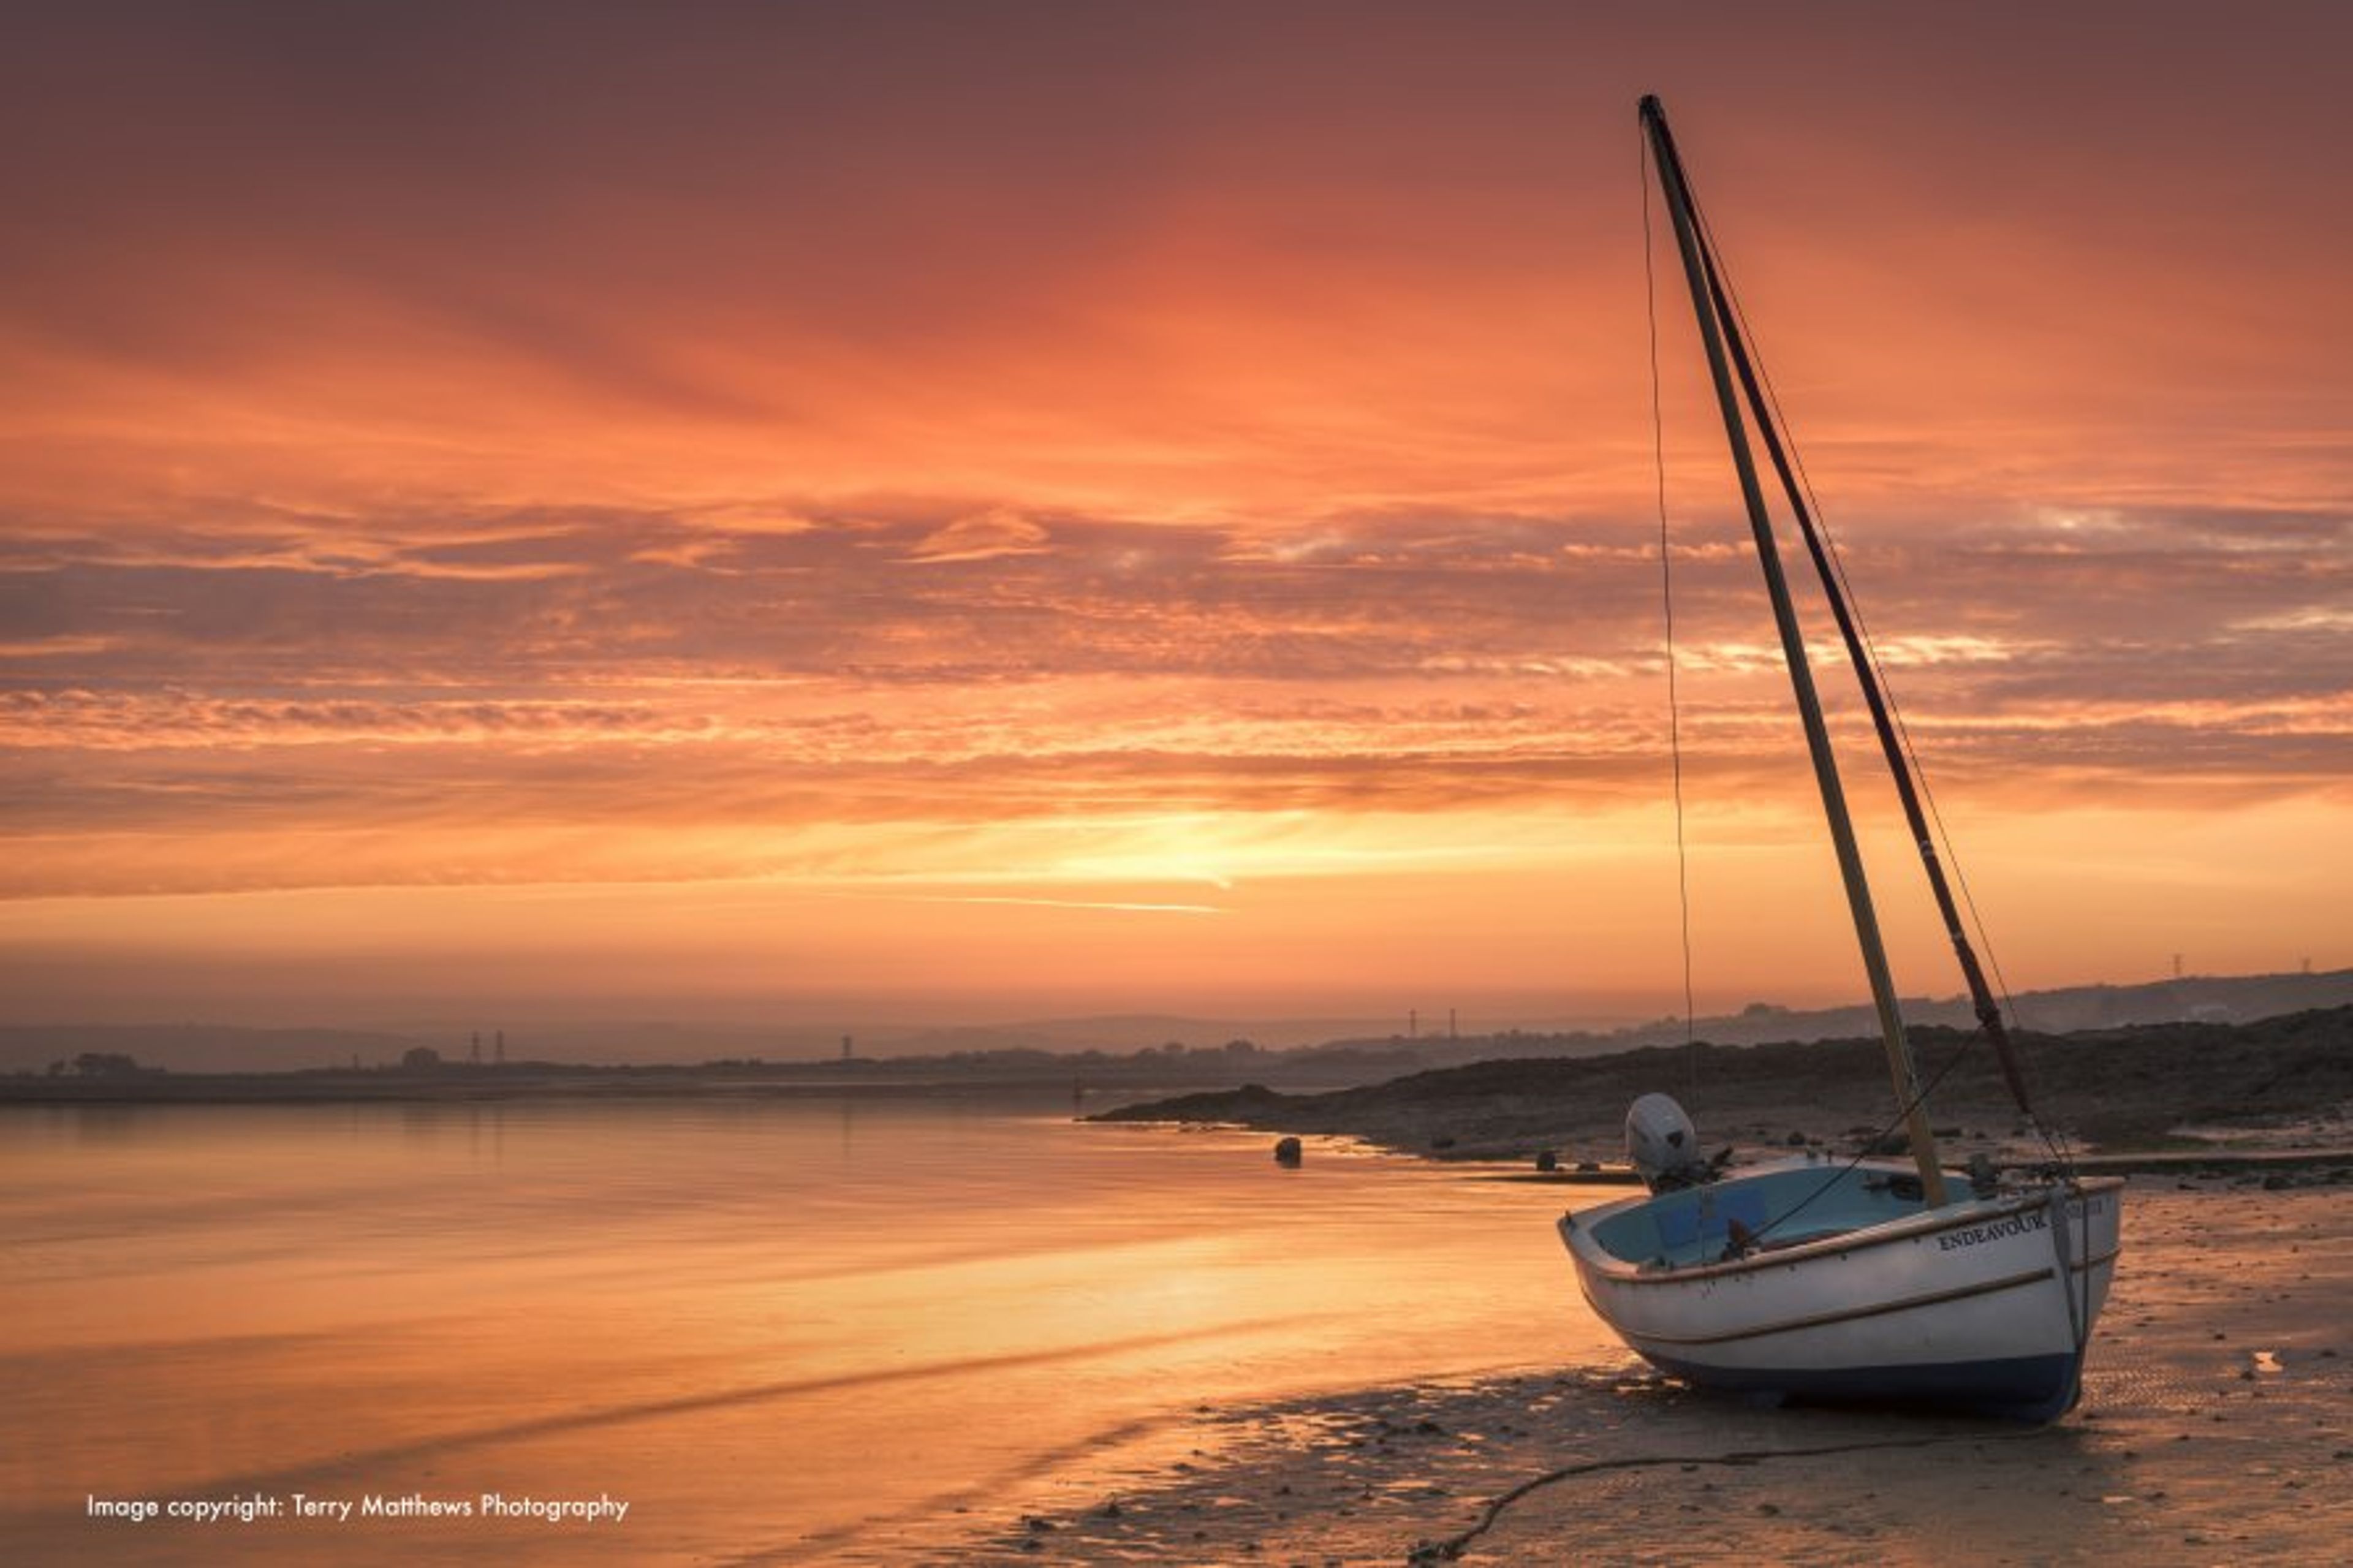 Appledore beach is a right on your doorstep